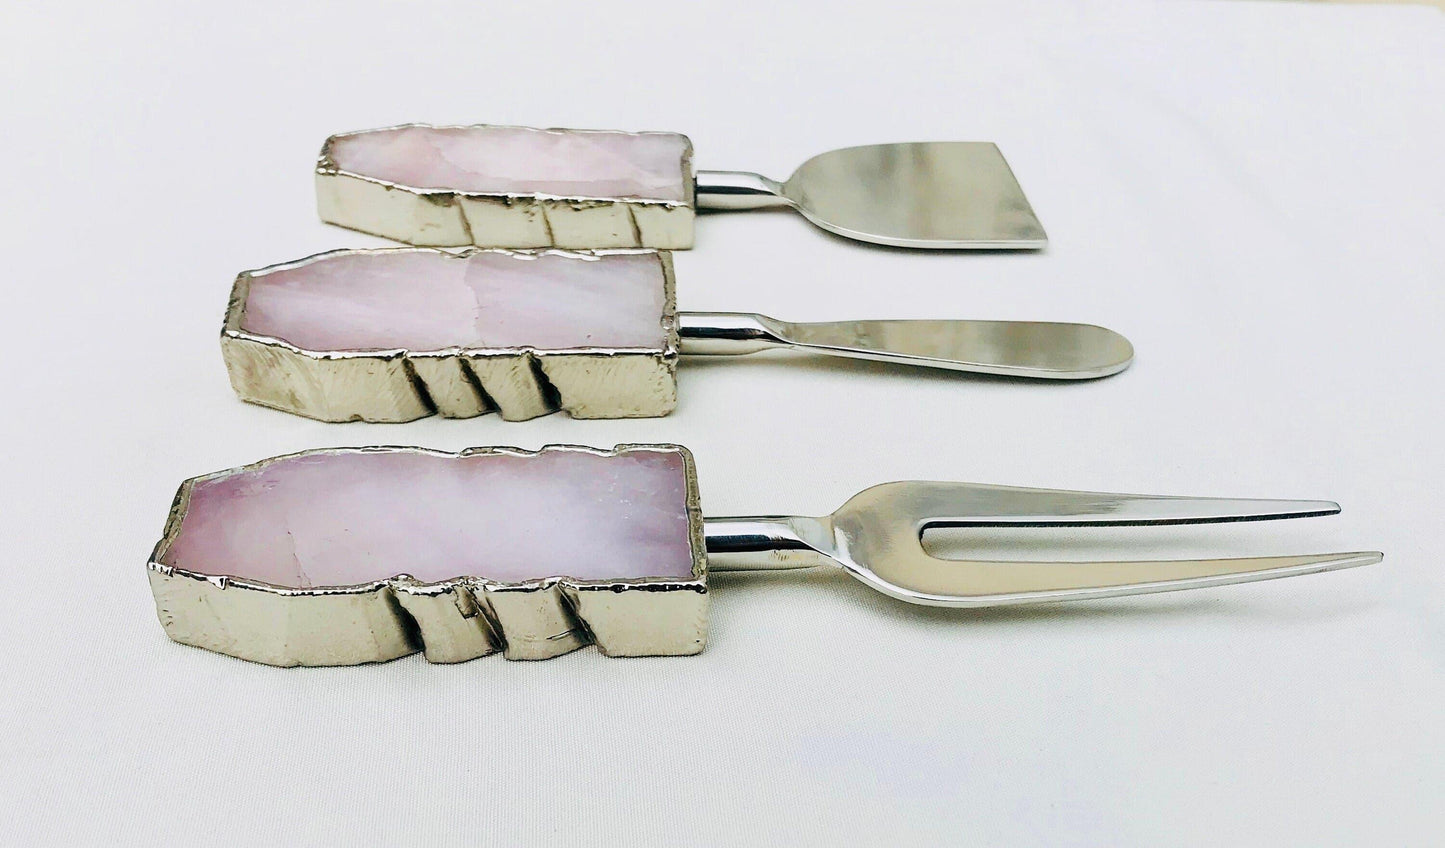 Set of 3 Rose Quartz Cheese Knives Spreaders - MAIA HOMES